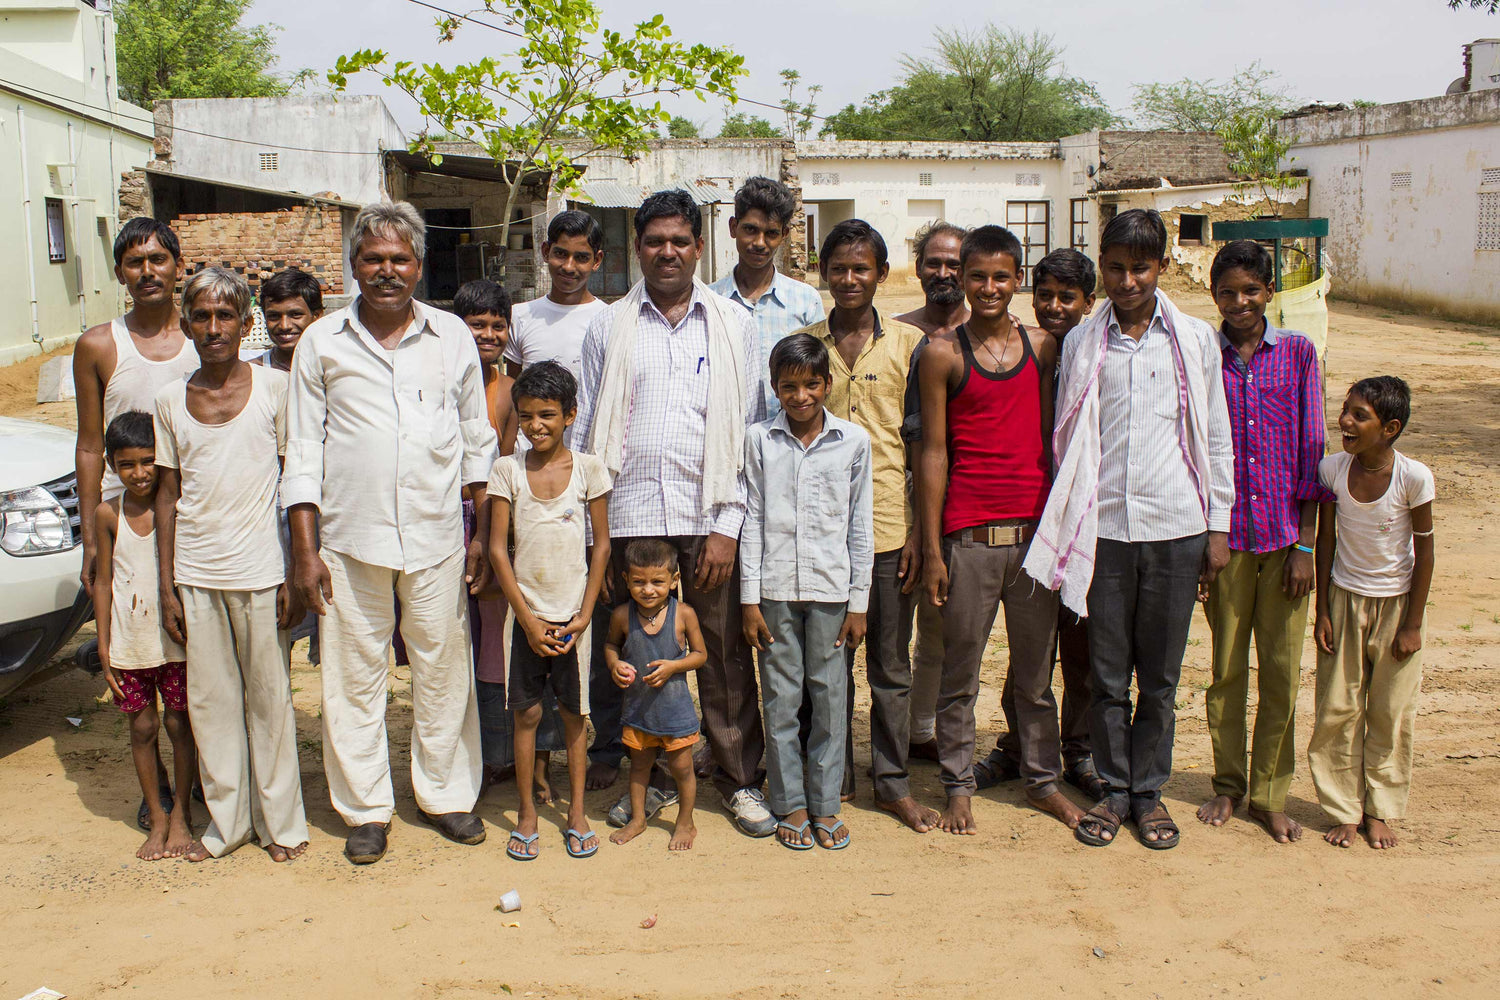 a group photo of weavers and young kids from an Indian Rajasthani village.